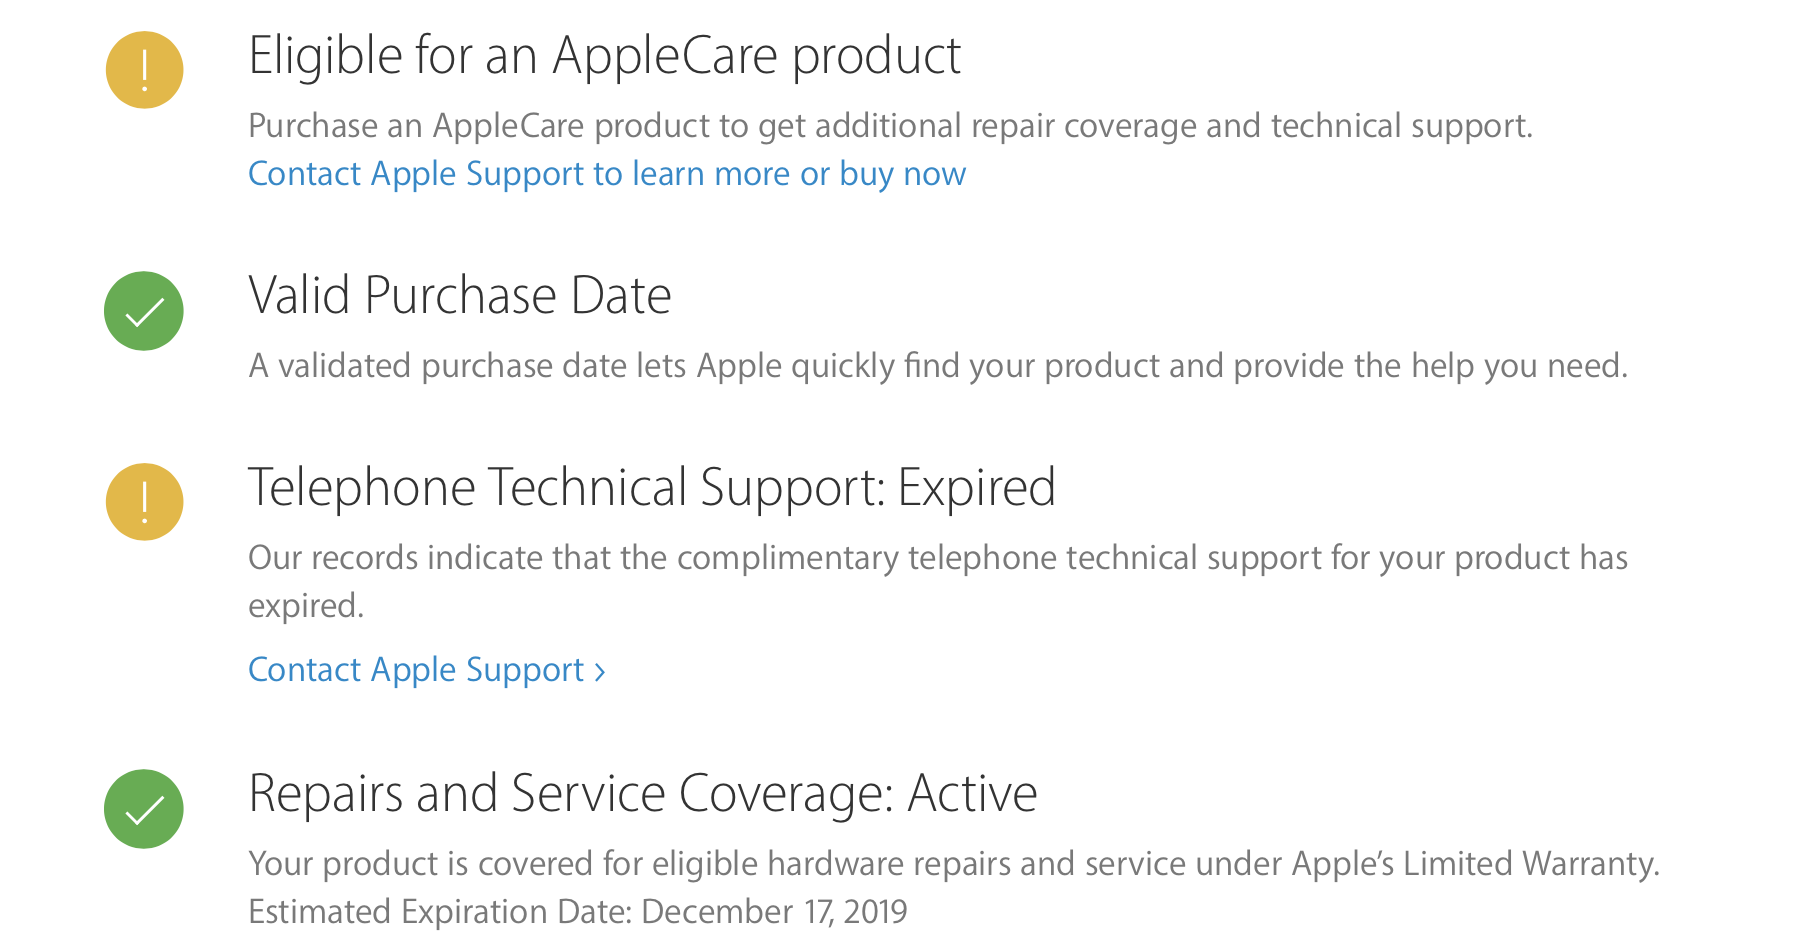 can i add applecare plus after purchase